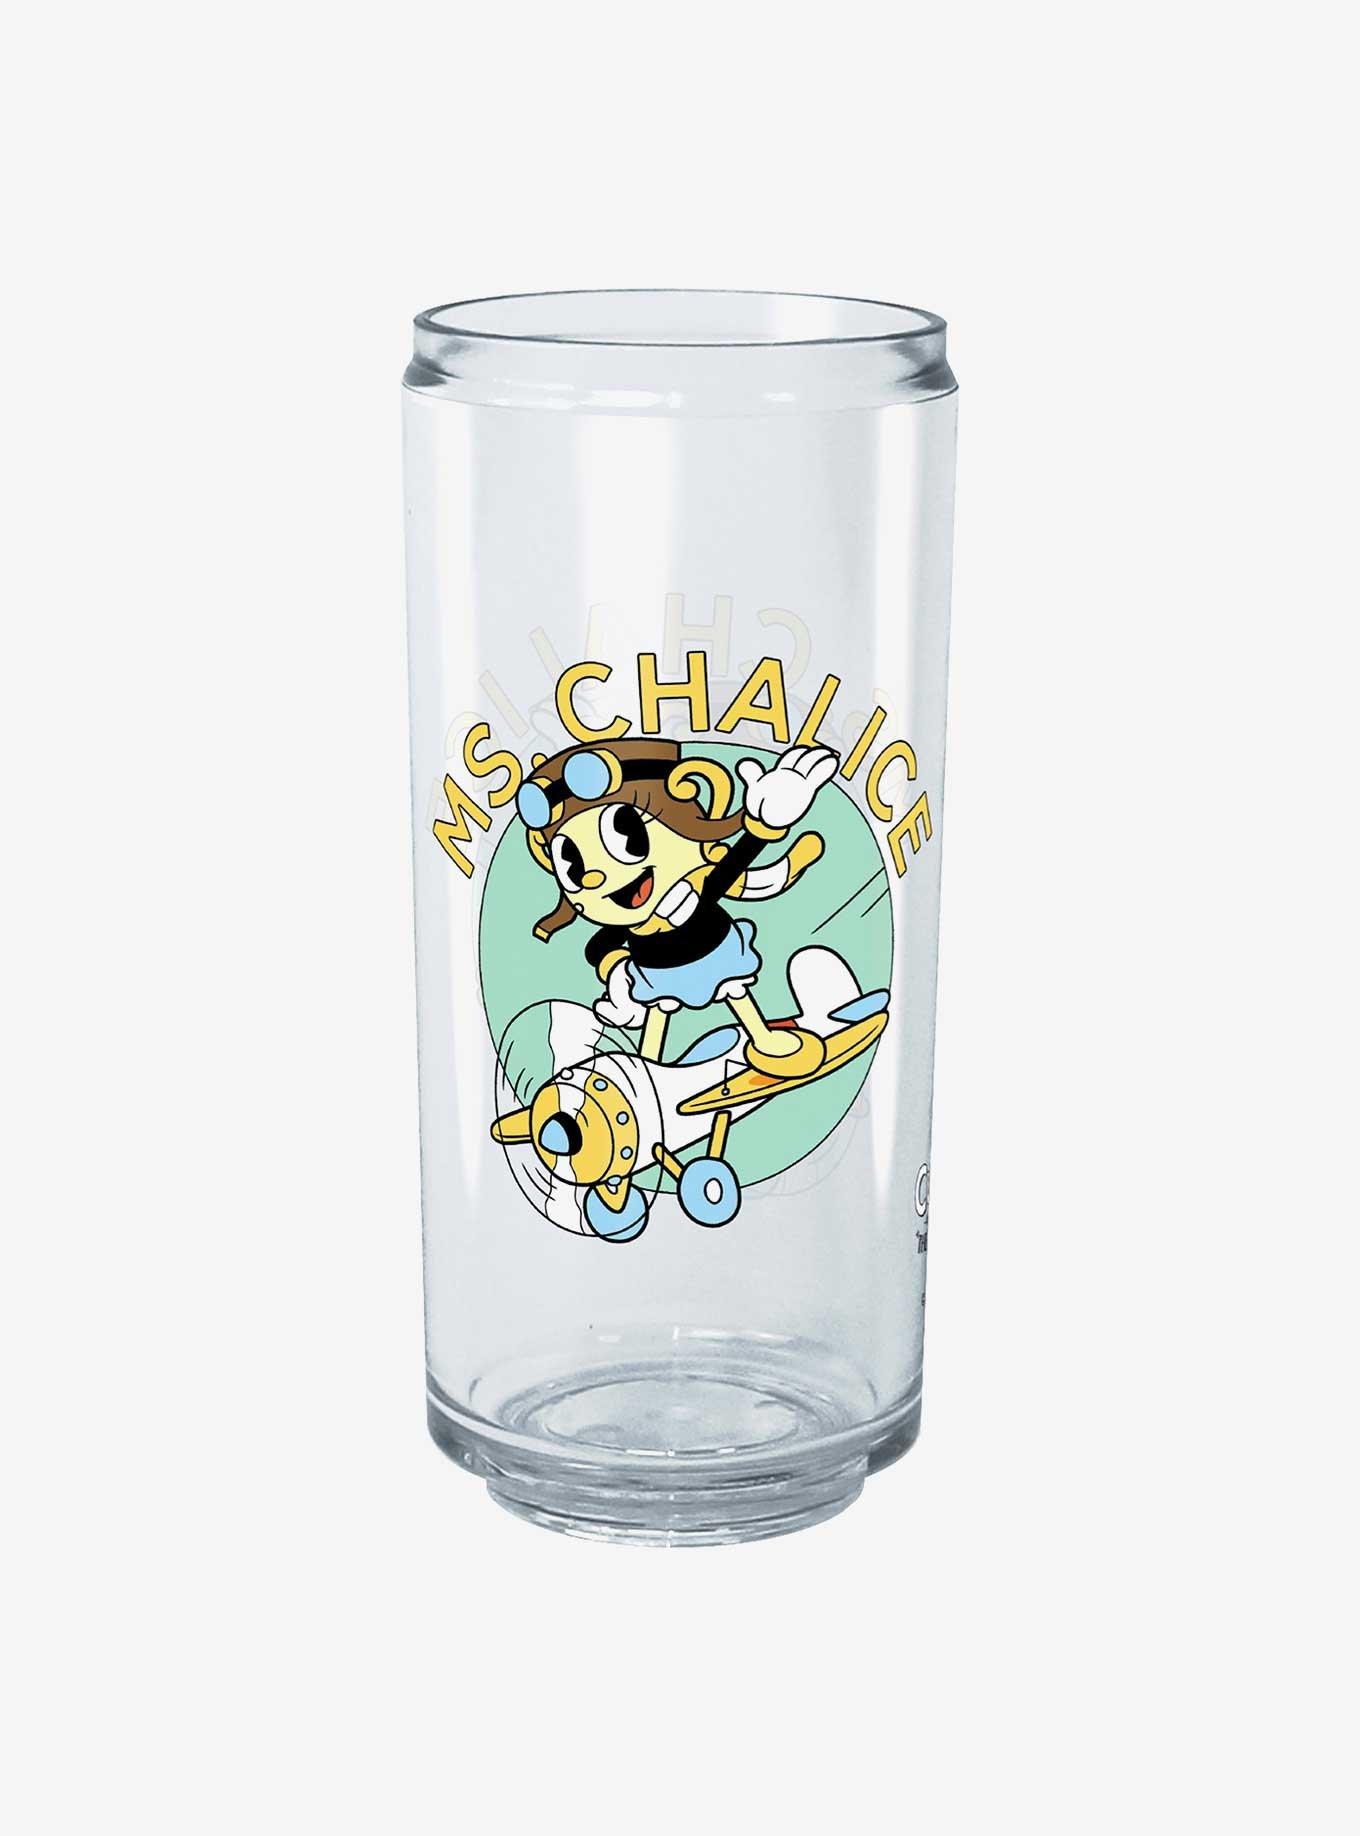 Boy's The Cuphead Show! Ms. Chalice Sketches T-Shirt – Fifth Sun